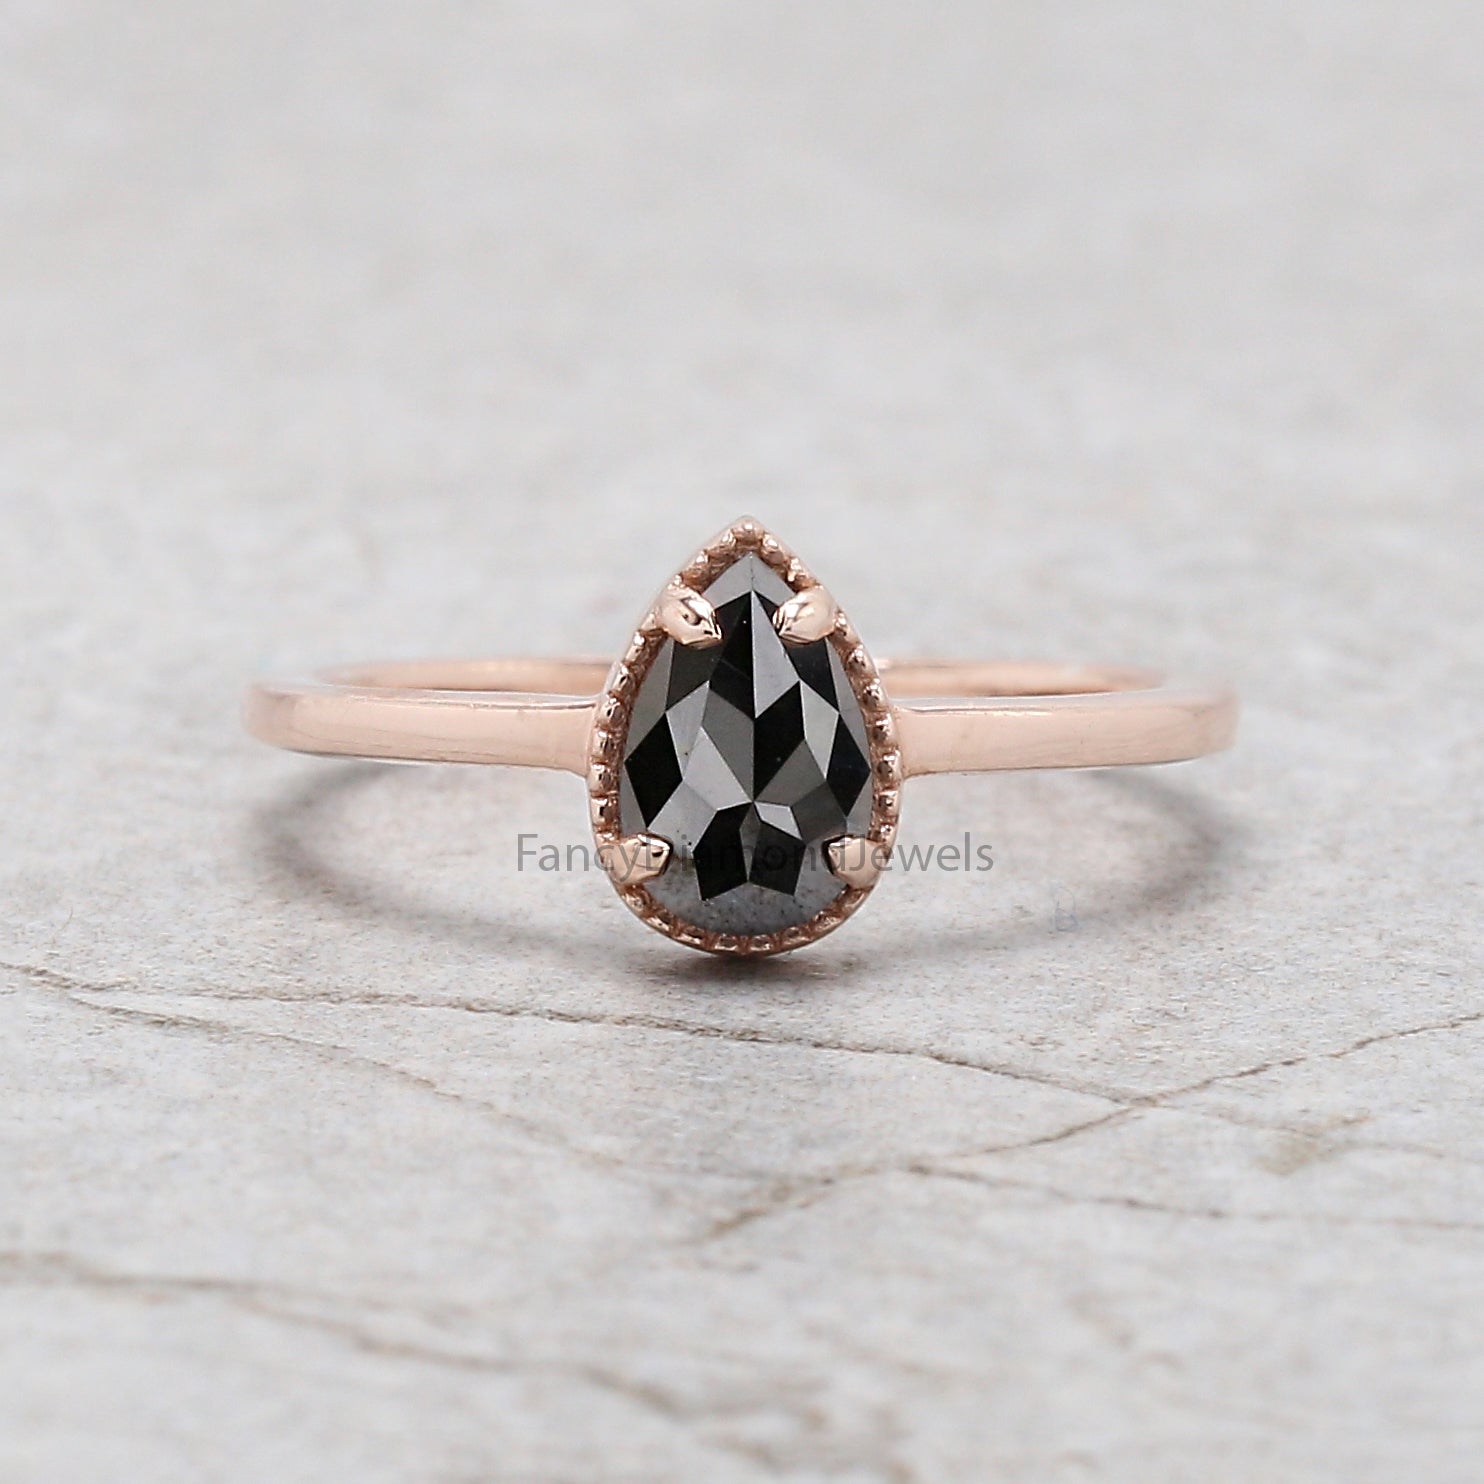 Pear Cut Black Color Diamond Ring 0.61 Ct 7.37 MM Pear Shape Diamond Ring 14K Solid Rose Gold Silver Pear Engagement Ring Gift For Her QN2270